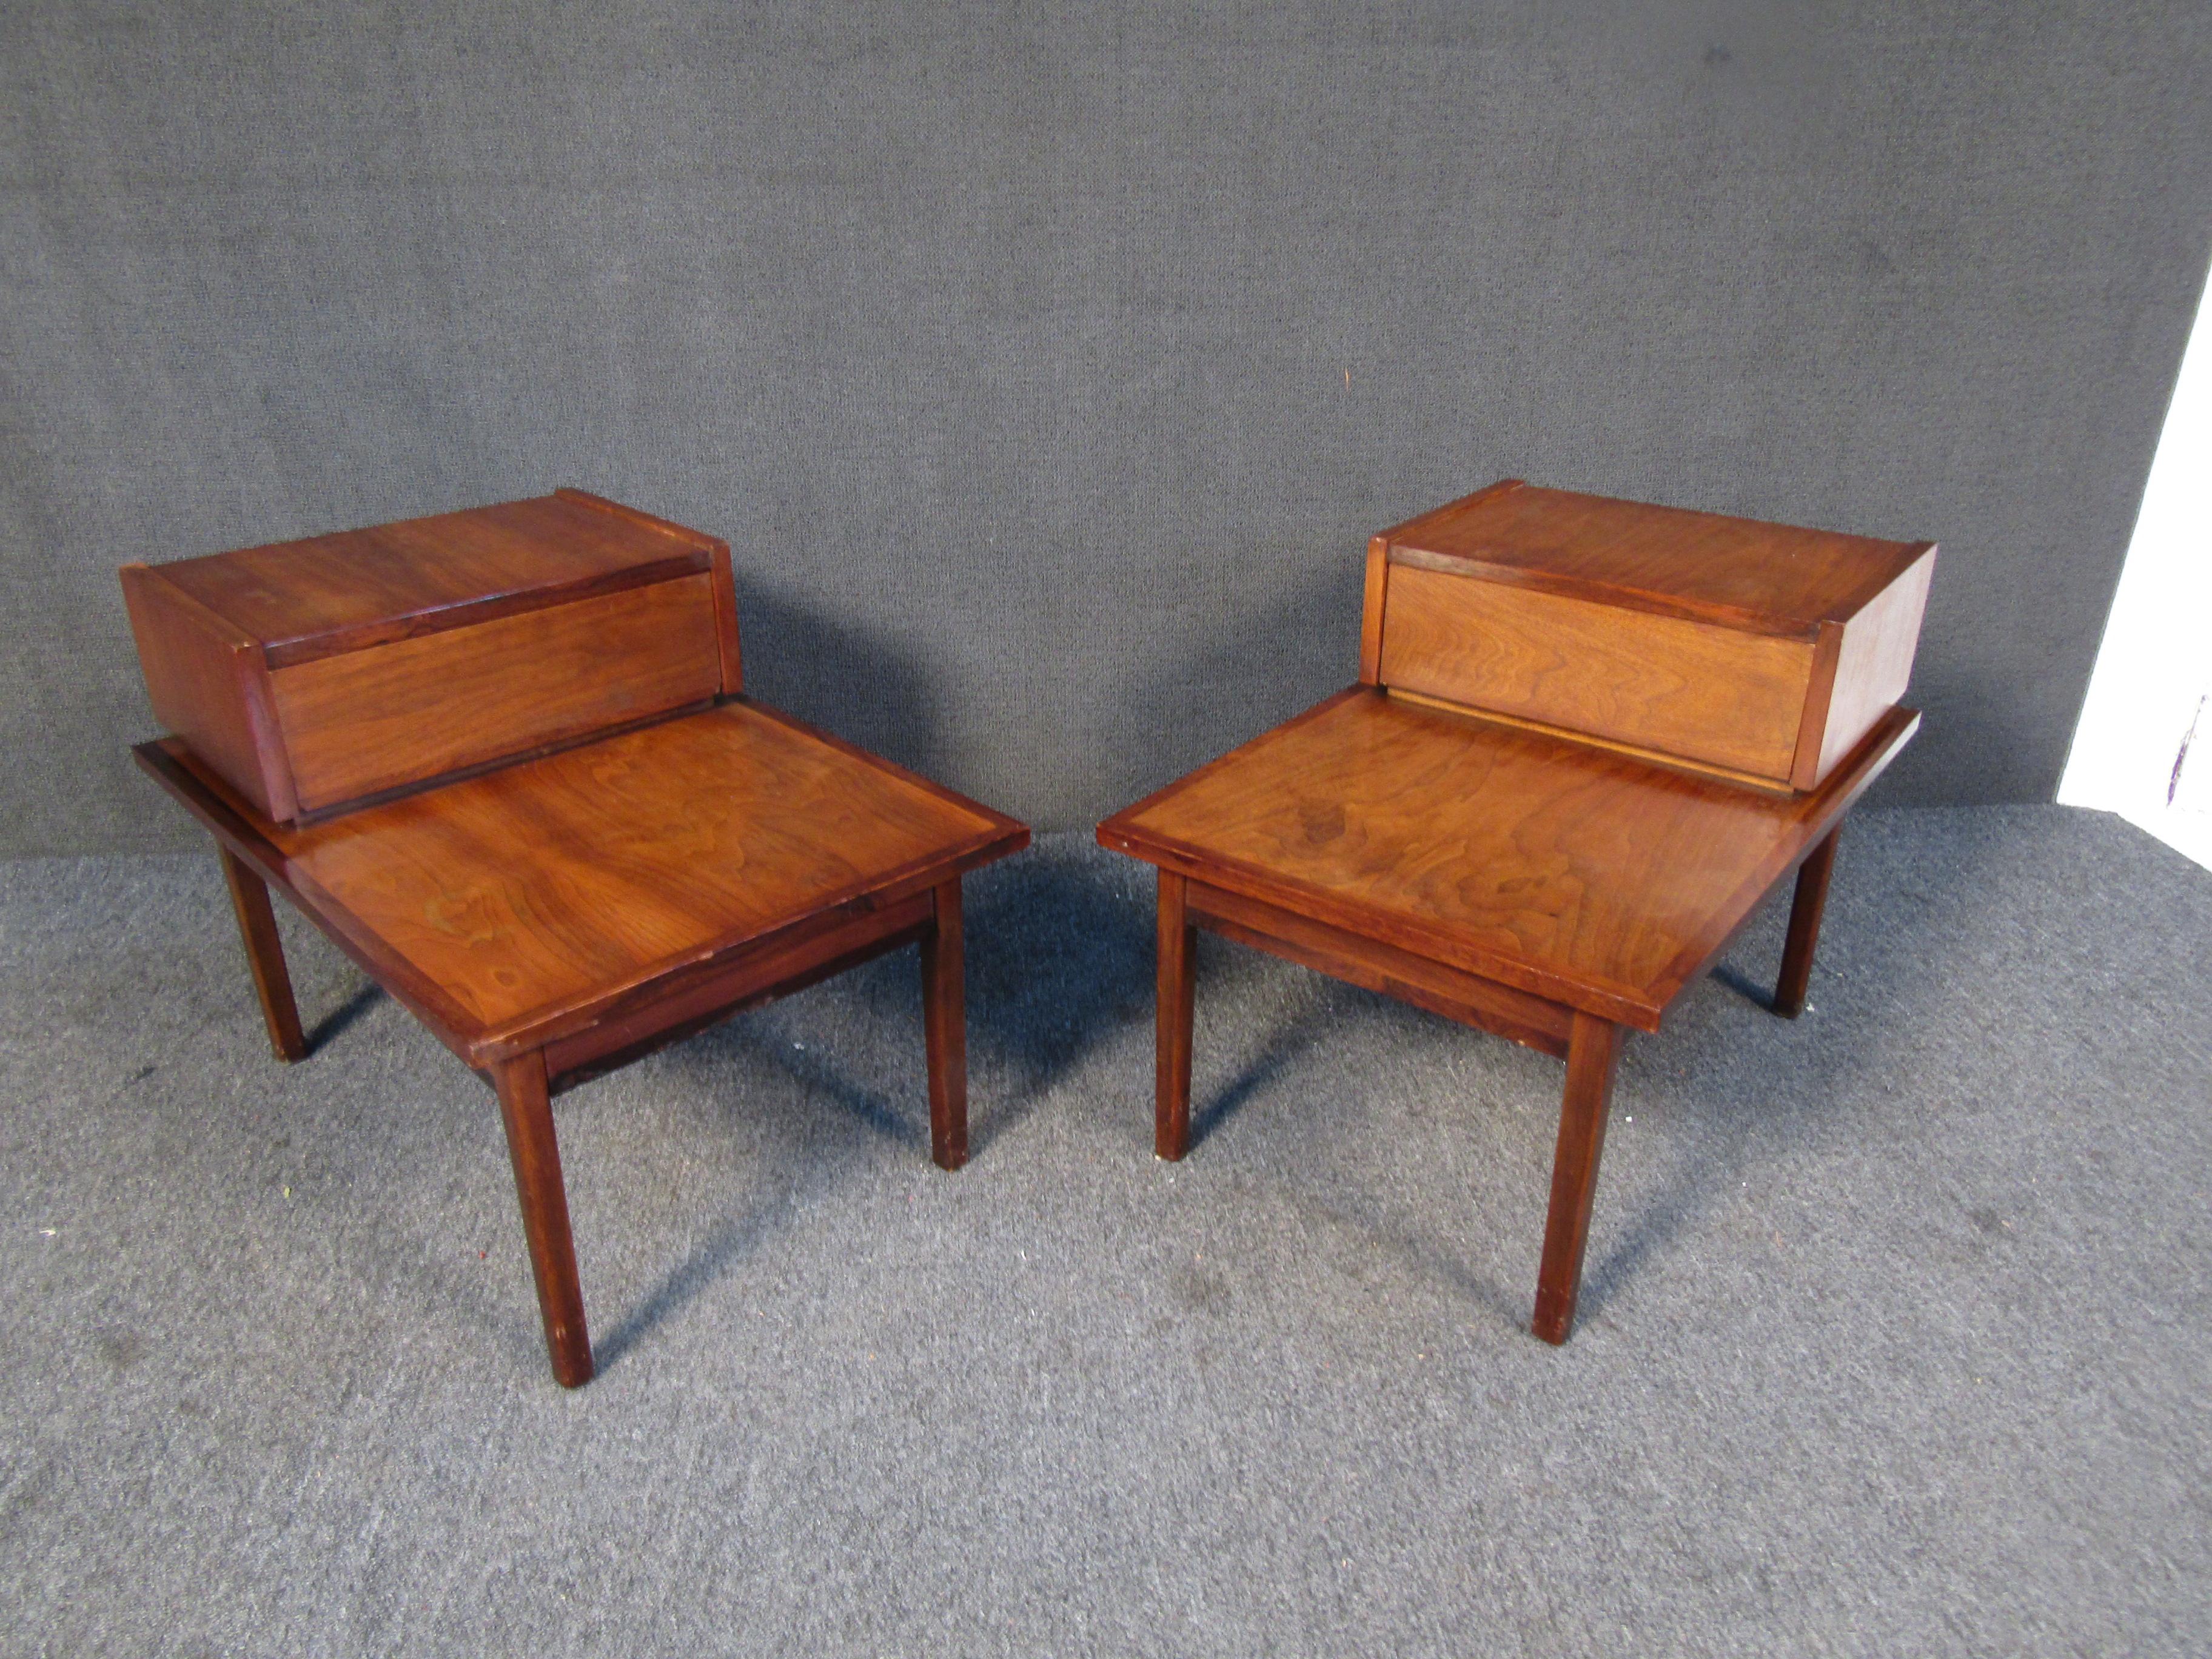 This elegant pair of walnut nightstands by Stanley combines an understated design with quality materials for a timeless Mid-Century Modern addition to any bedroom. Please confirm item location with seller (NY/NJ).